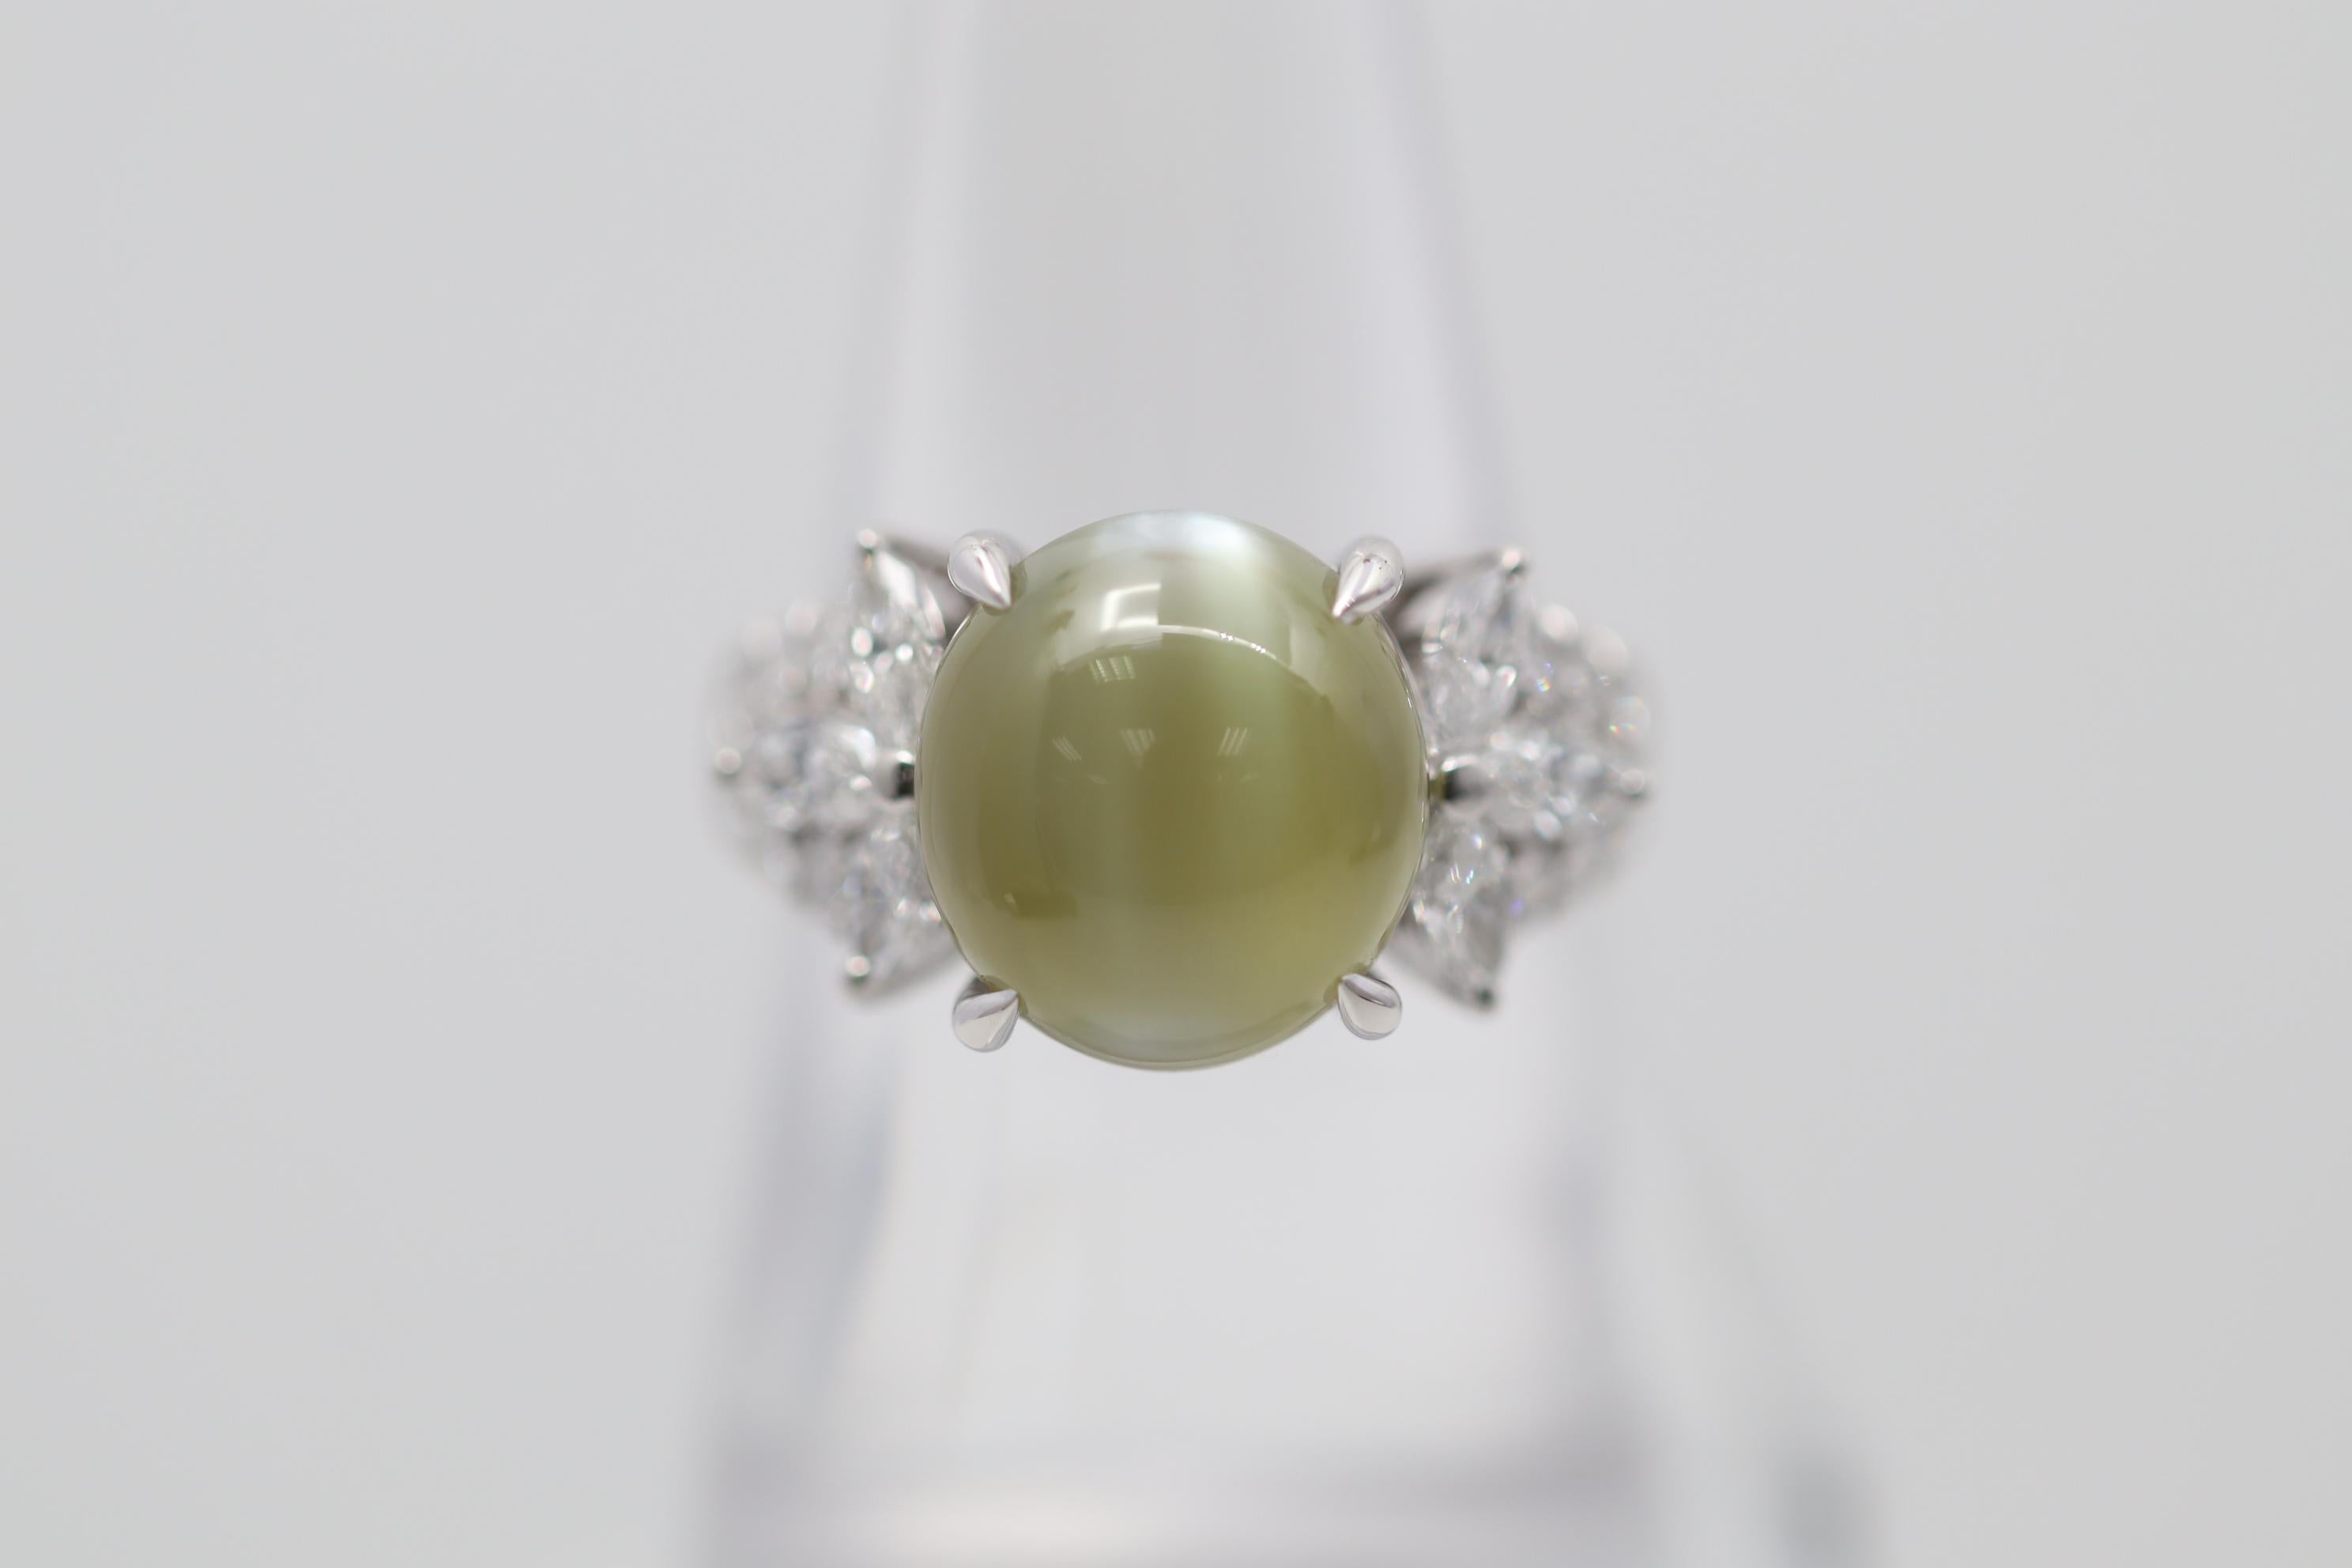 A superb gem-quality cats-eye chrysoberyl weighing an impressive 9.20 carats takes center stage of this platinum made ring. The cats-eye has a lovely yellowish-green color and an exceptional chatoyant eye (cats-eye effect) when a light hits its